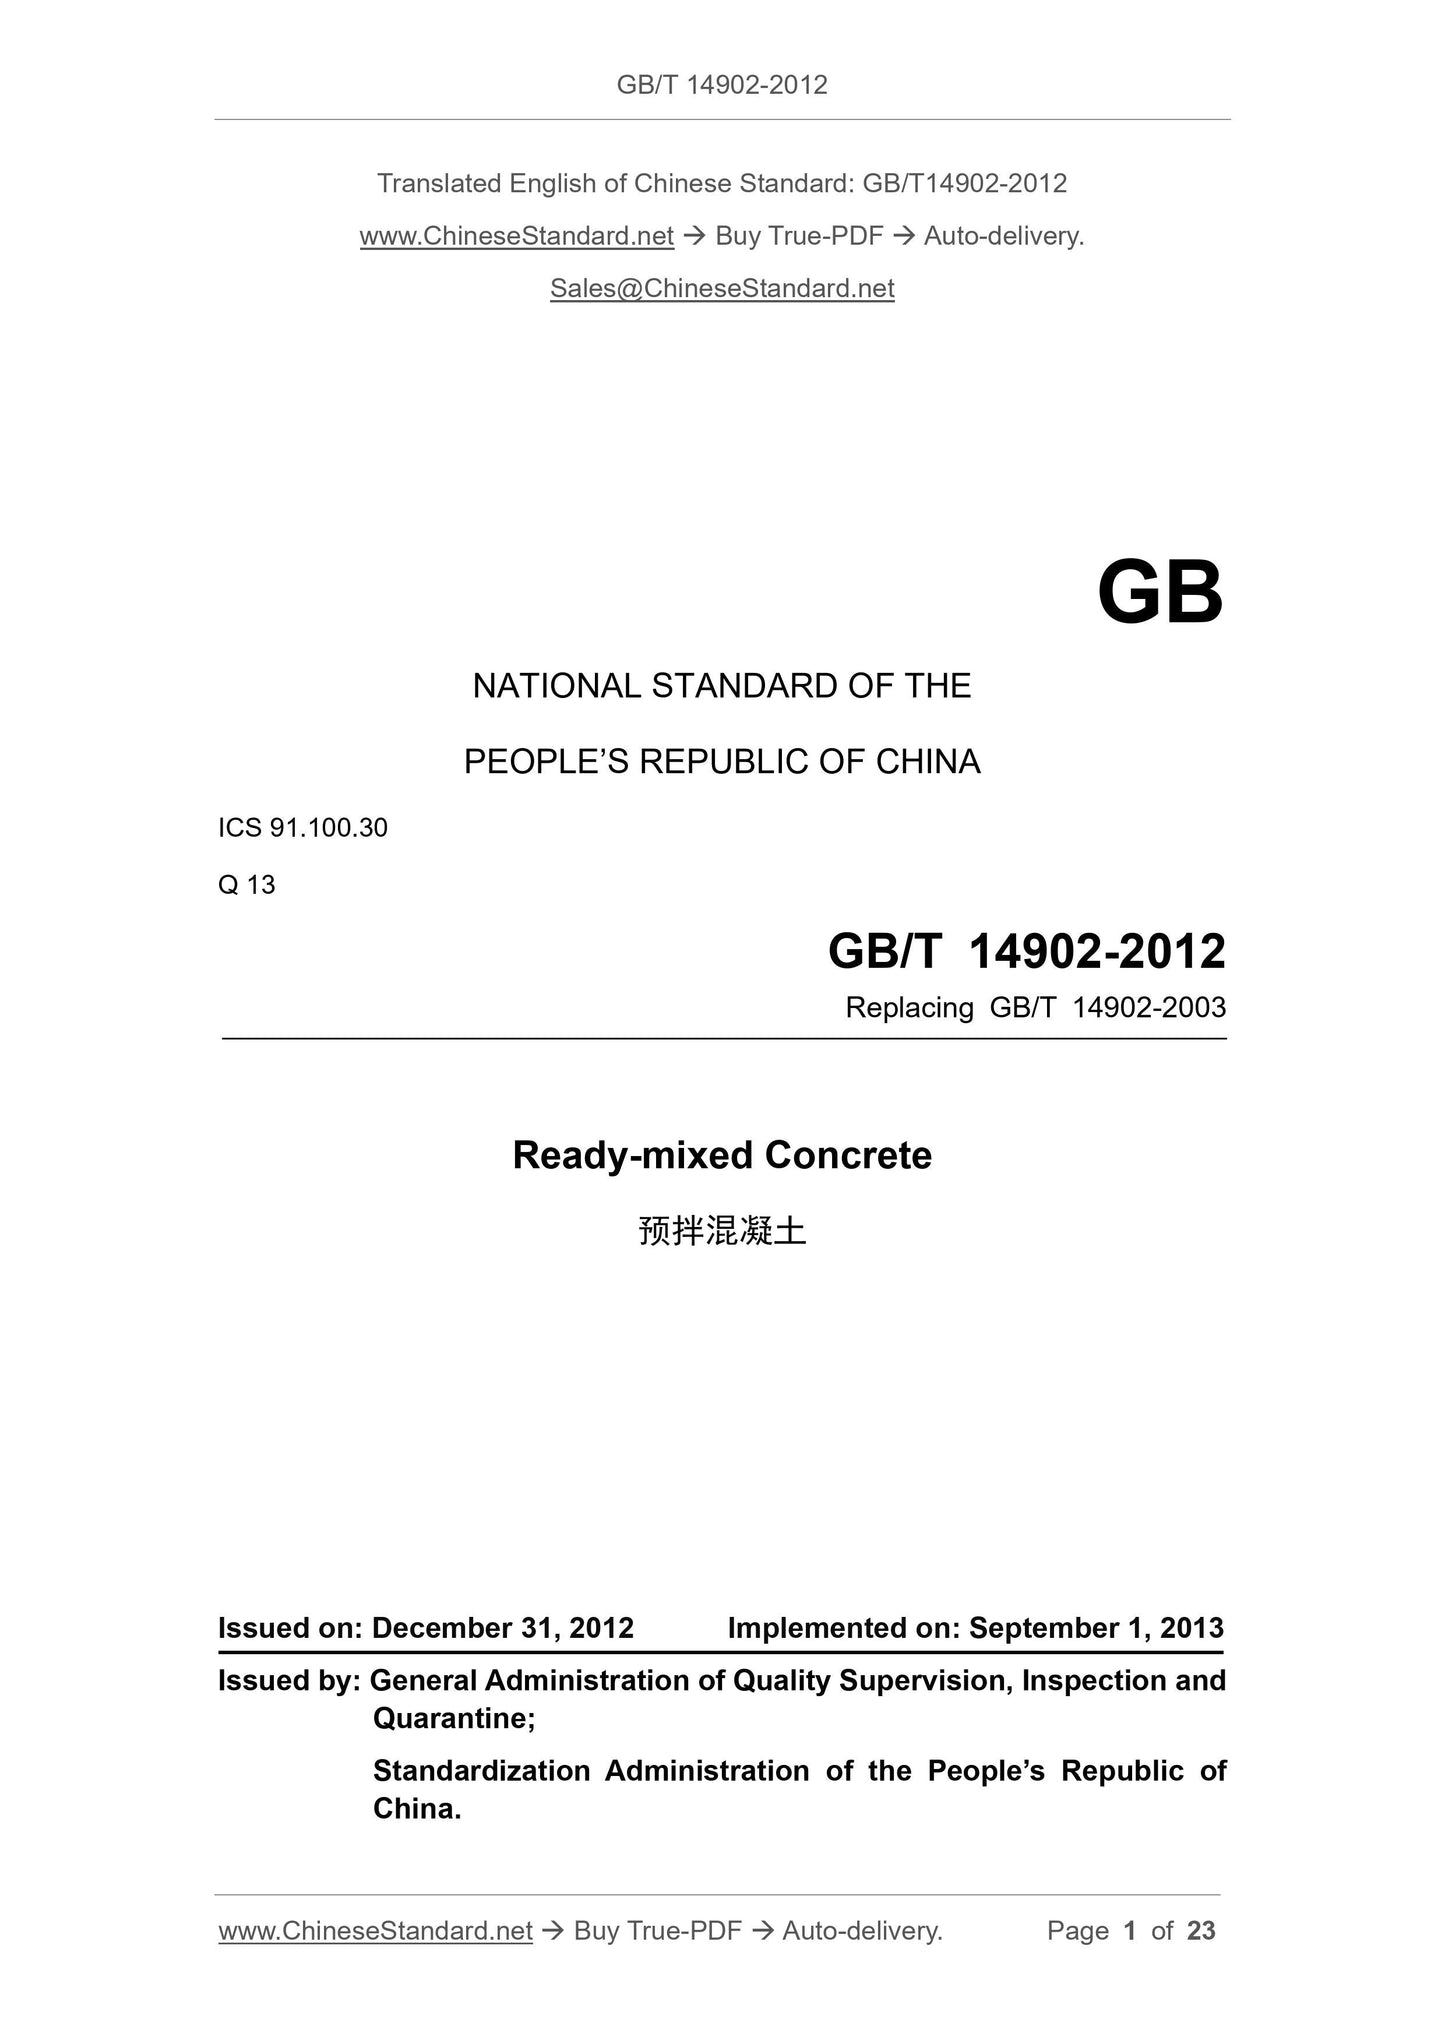 GB/T 14902-2012 Page 1